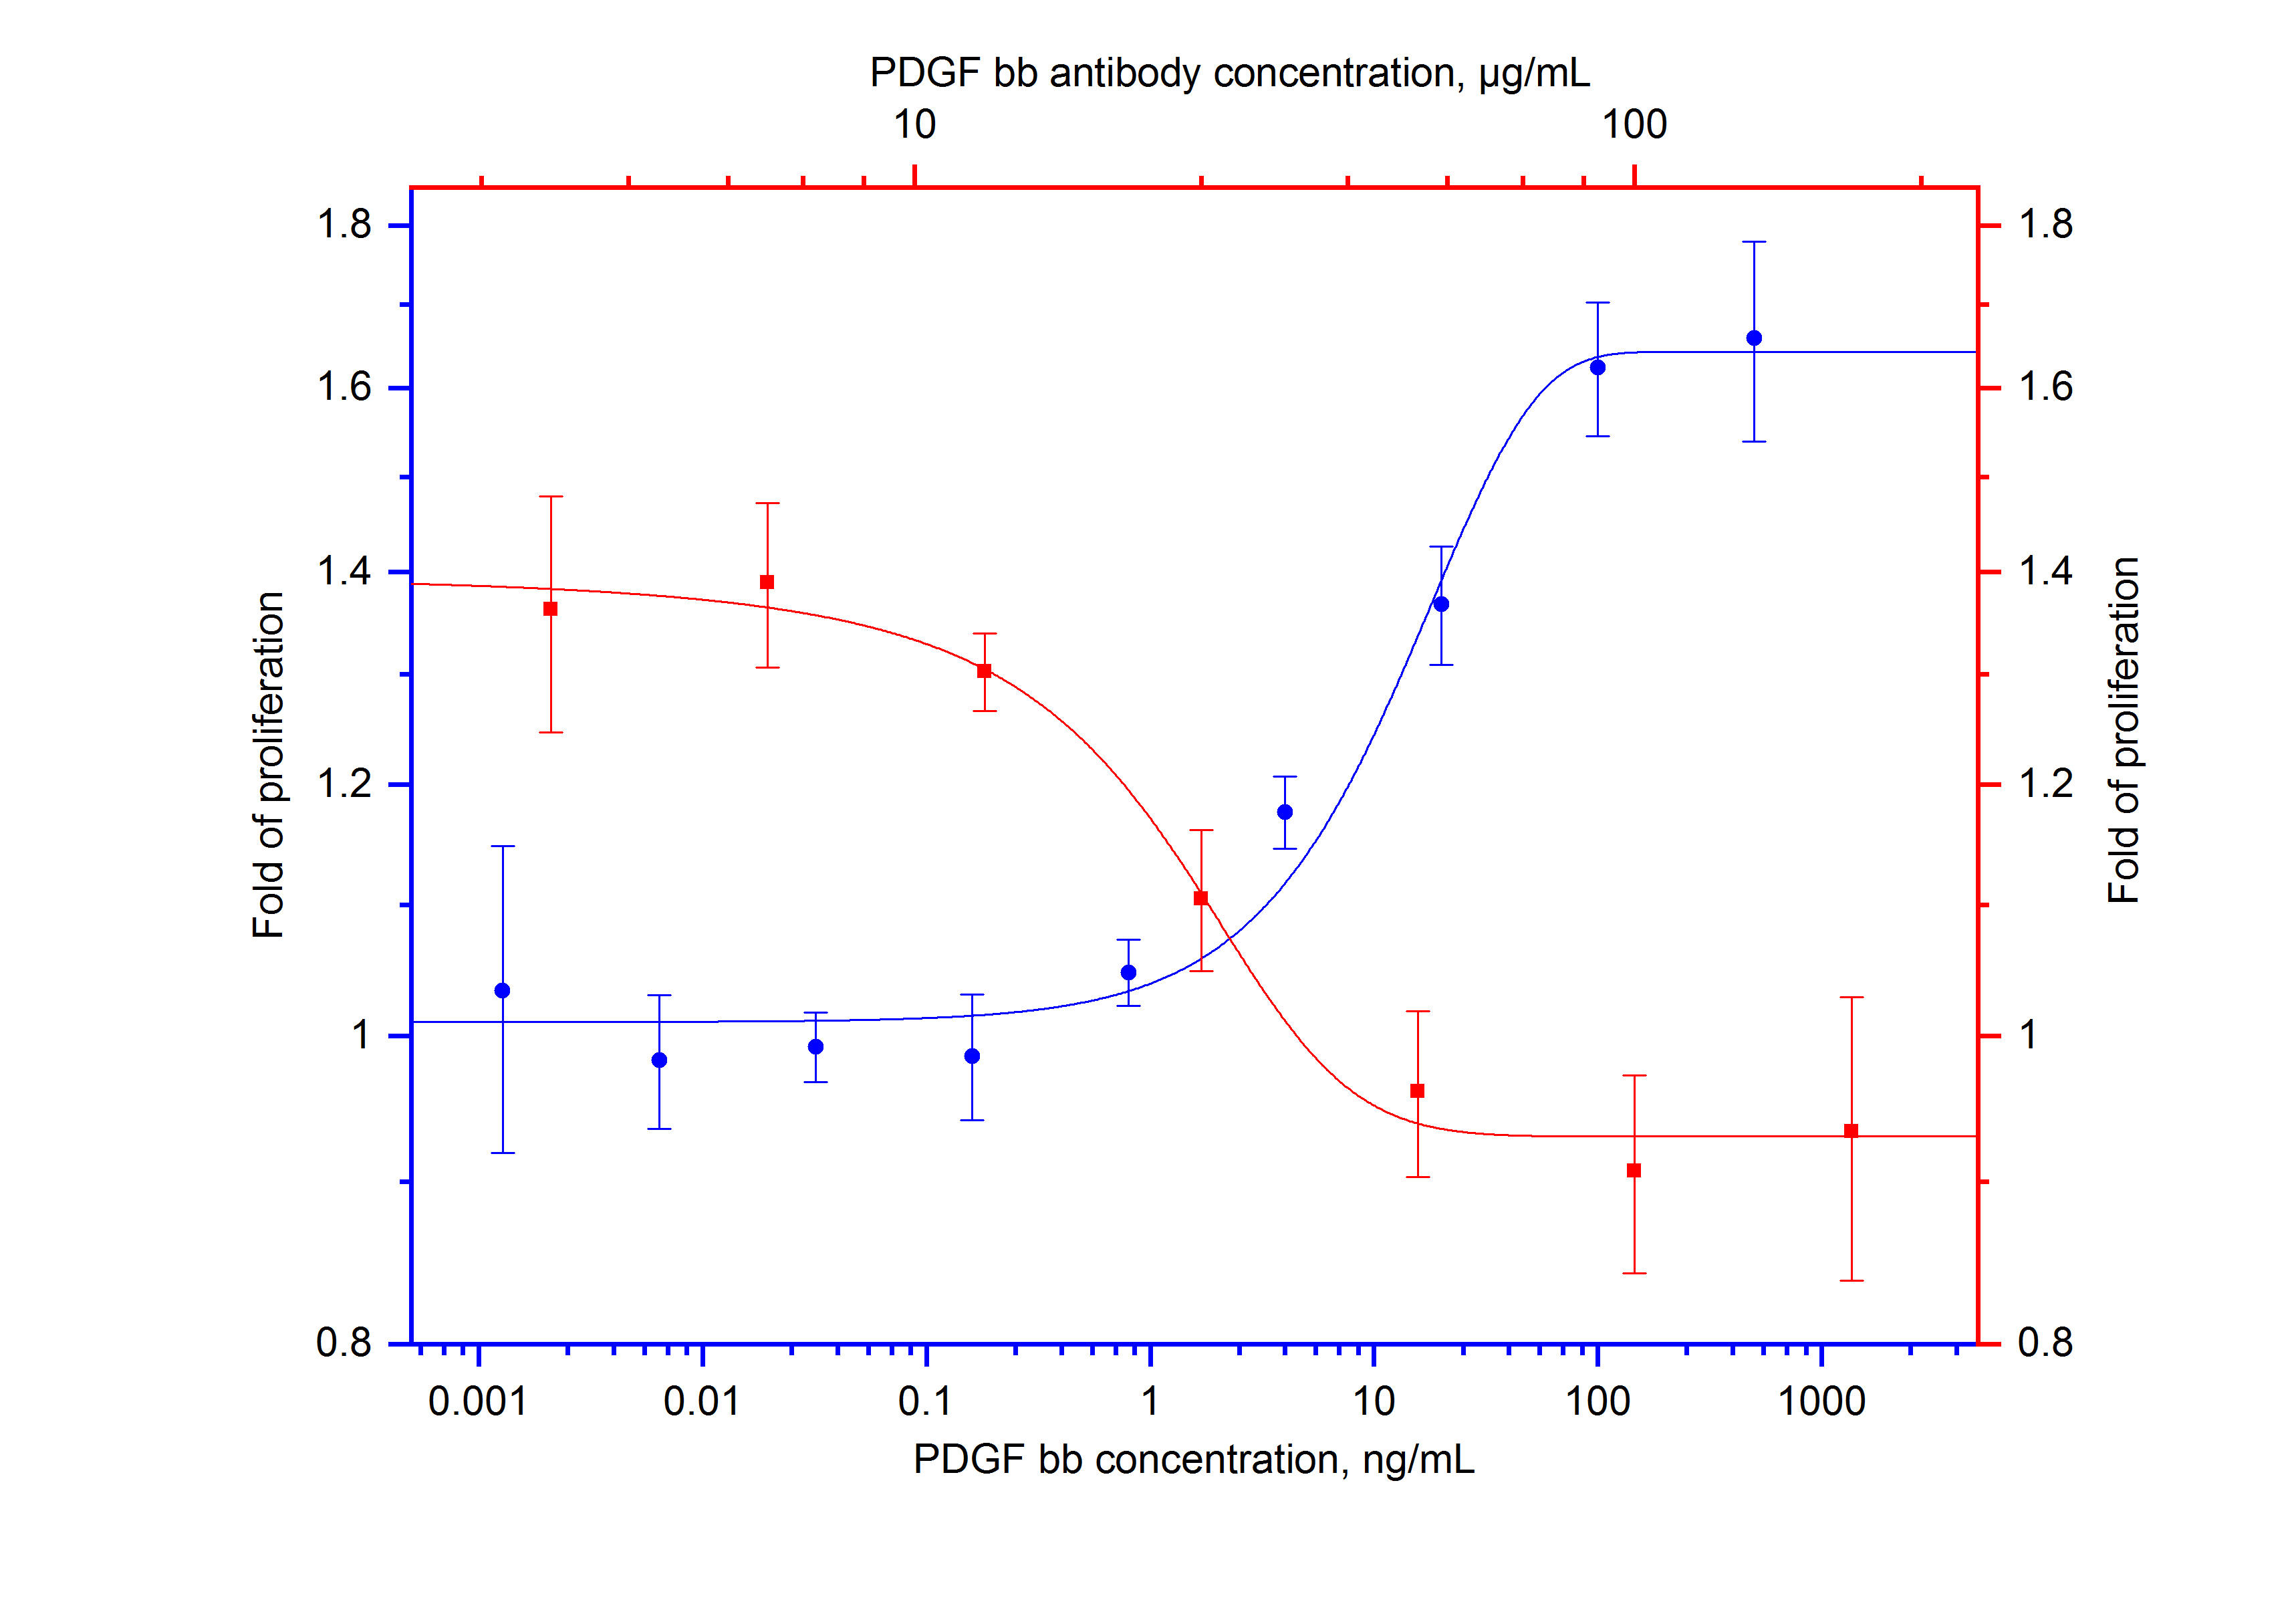 Recombinant human PDGFbb (Cat.NO. HZ-1308) stimulates proliferation of BALB/3T3 (mouse fibroblast cell line) in a dose dependent manner (blue curve, refer to bottom X-left Y axis). The activity of human PDGFbb (20ng/mL HZ-1308) is neutralized by mouse anti-human PDGFbb monoclonal antibody 69020-1-Ig at serial dose (red curve, refer to top X-right Y axis). The ND50 is typically 20-50 μg/mL.